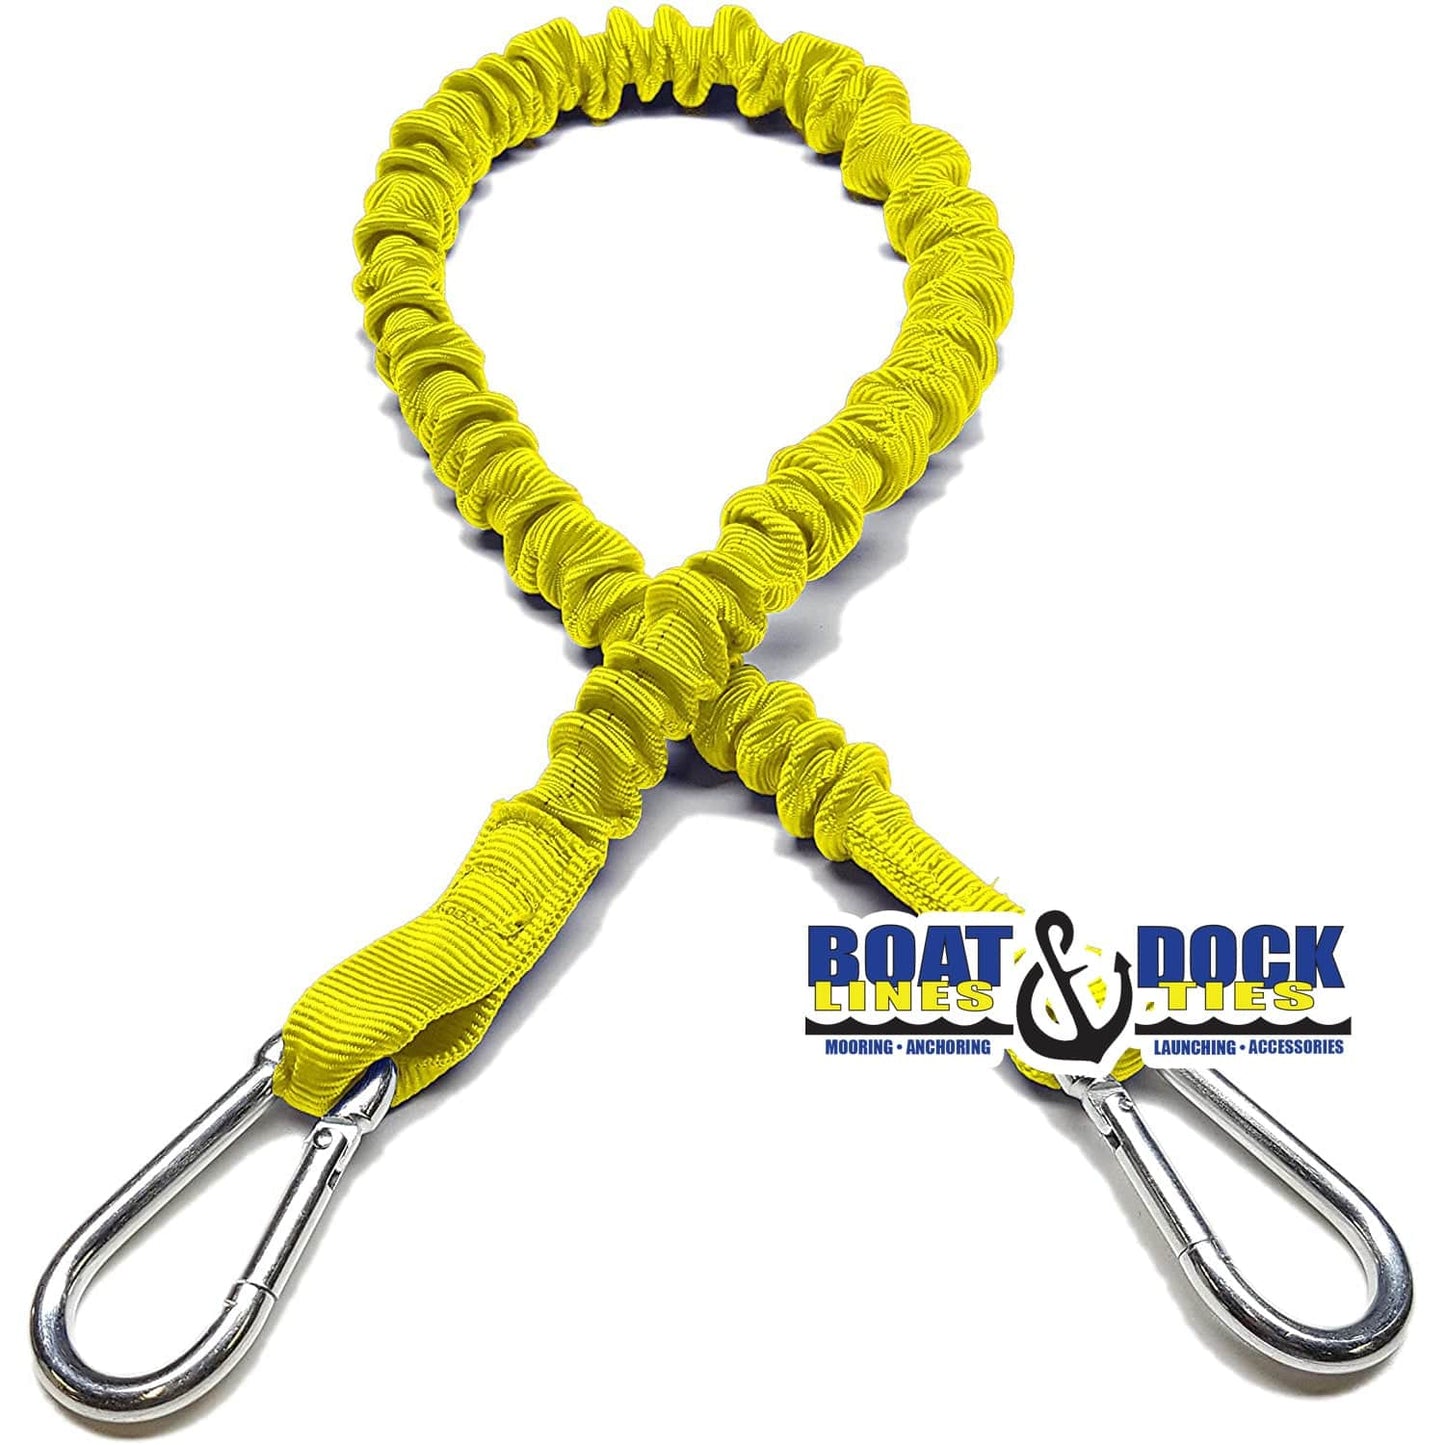 Boat Dock Tie Bungee Cords, 2 Hooked Ends, UV Protected Bungee Cords - Set of 2 - Made in USA - Boat Lines & Dock Ties Boat Lines & Dock Ties 36" / Yellow